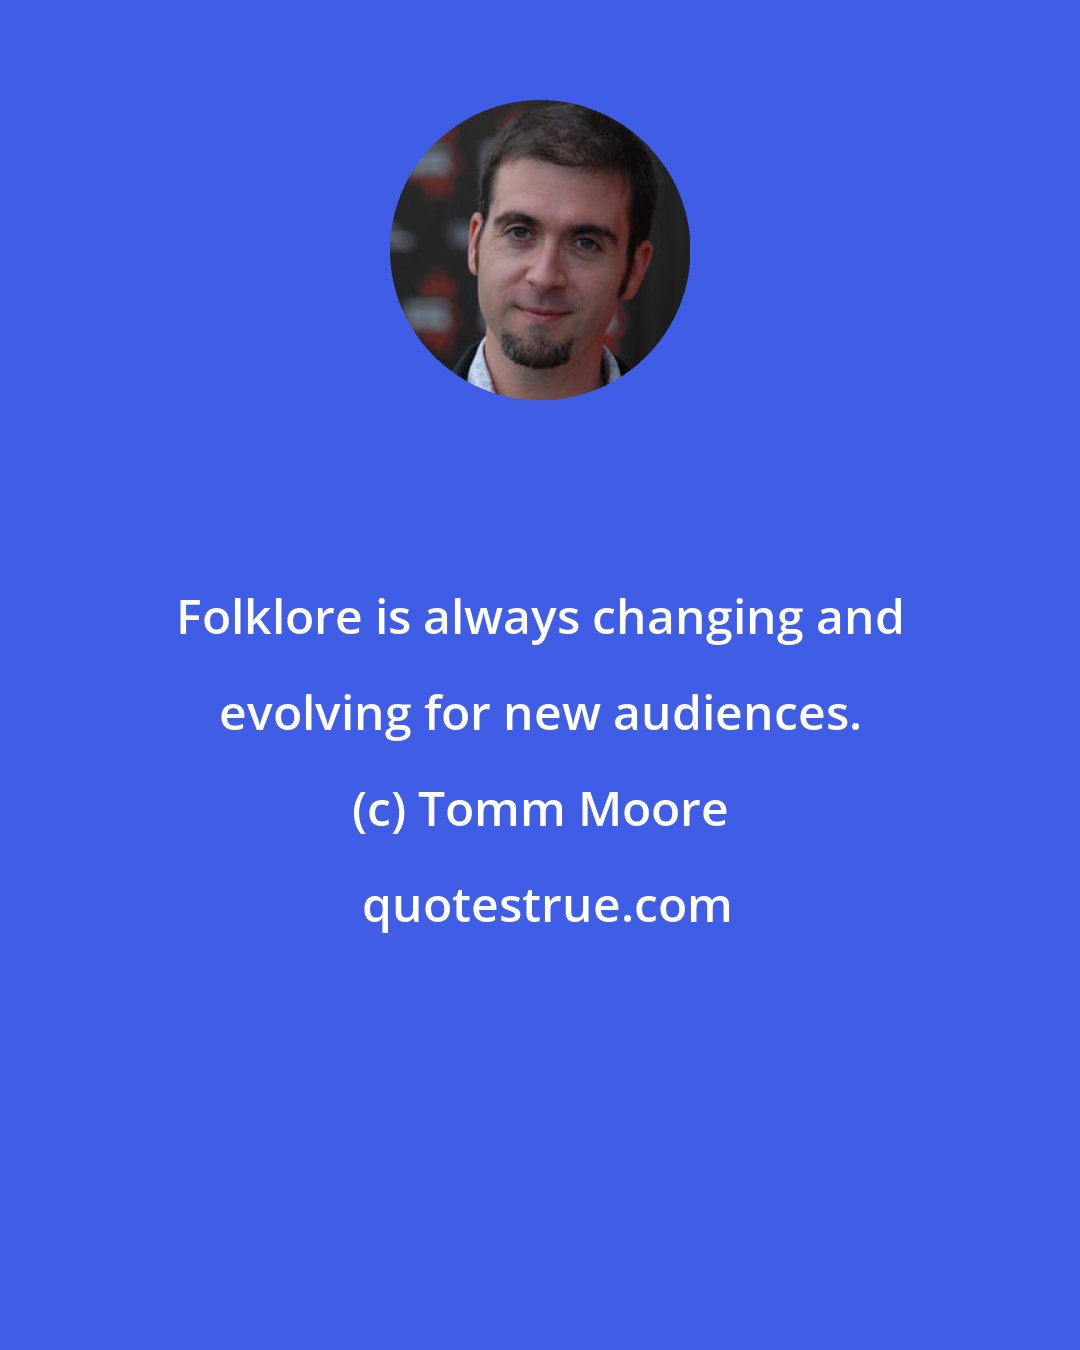 Tomm Moore: Folklore is always changing and evolving for new audiences.